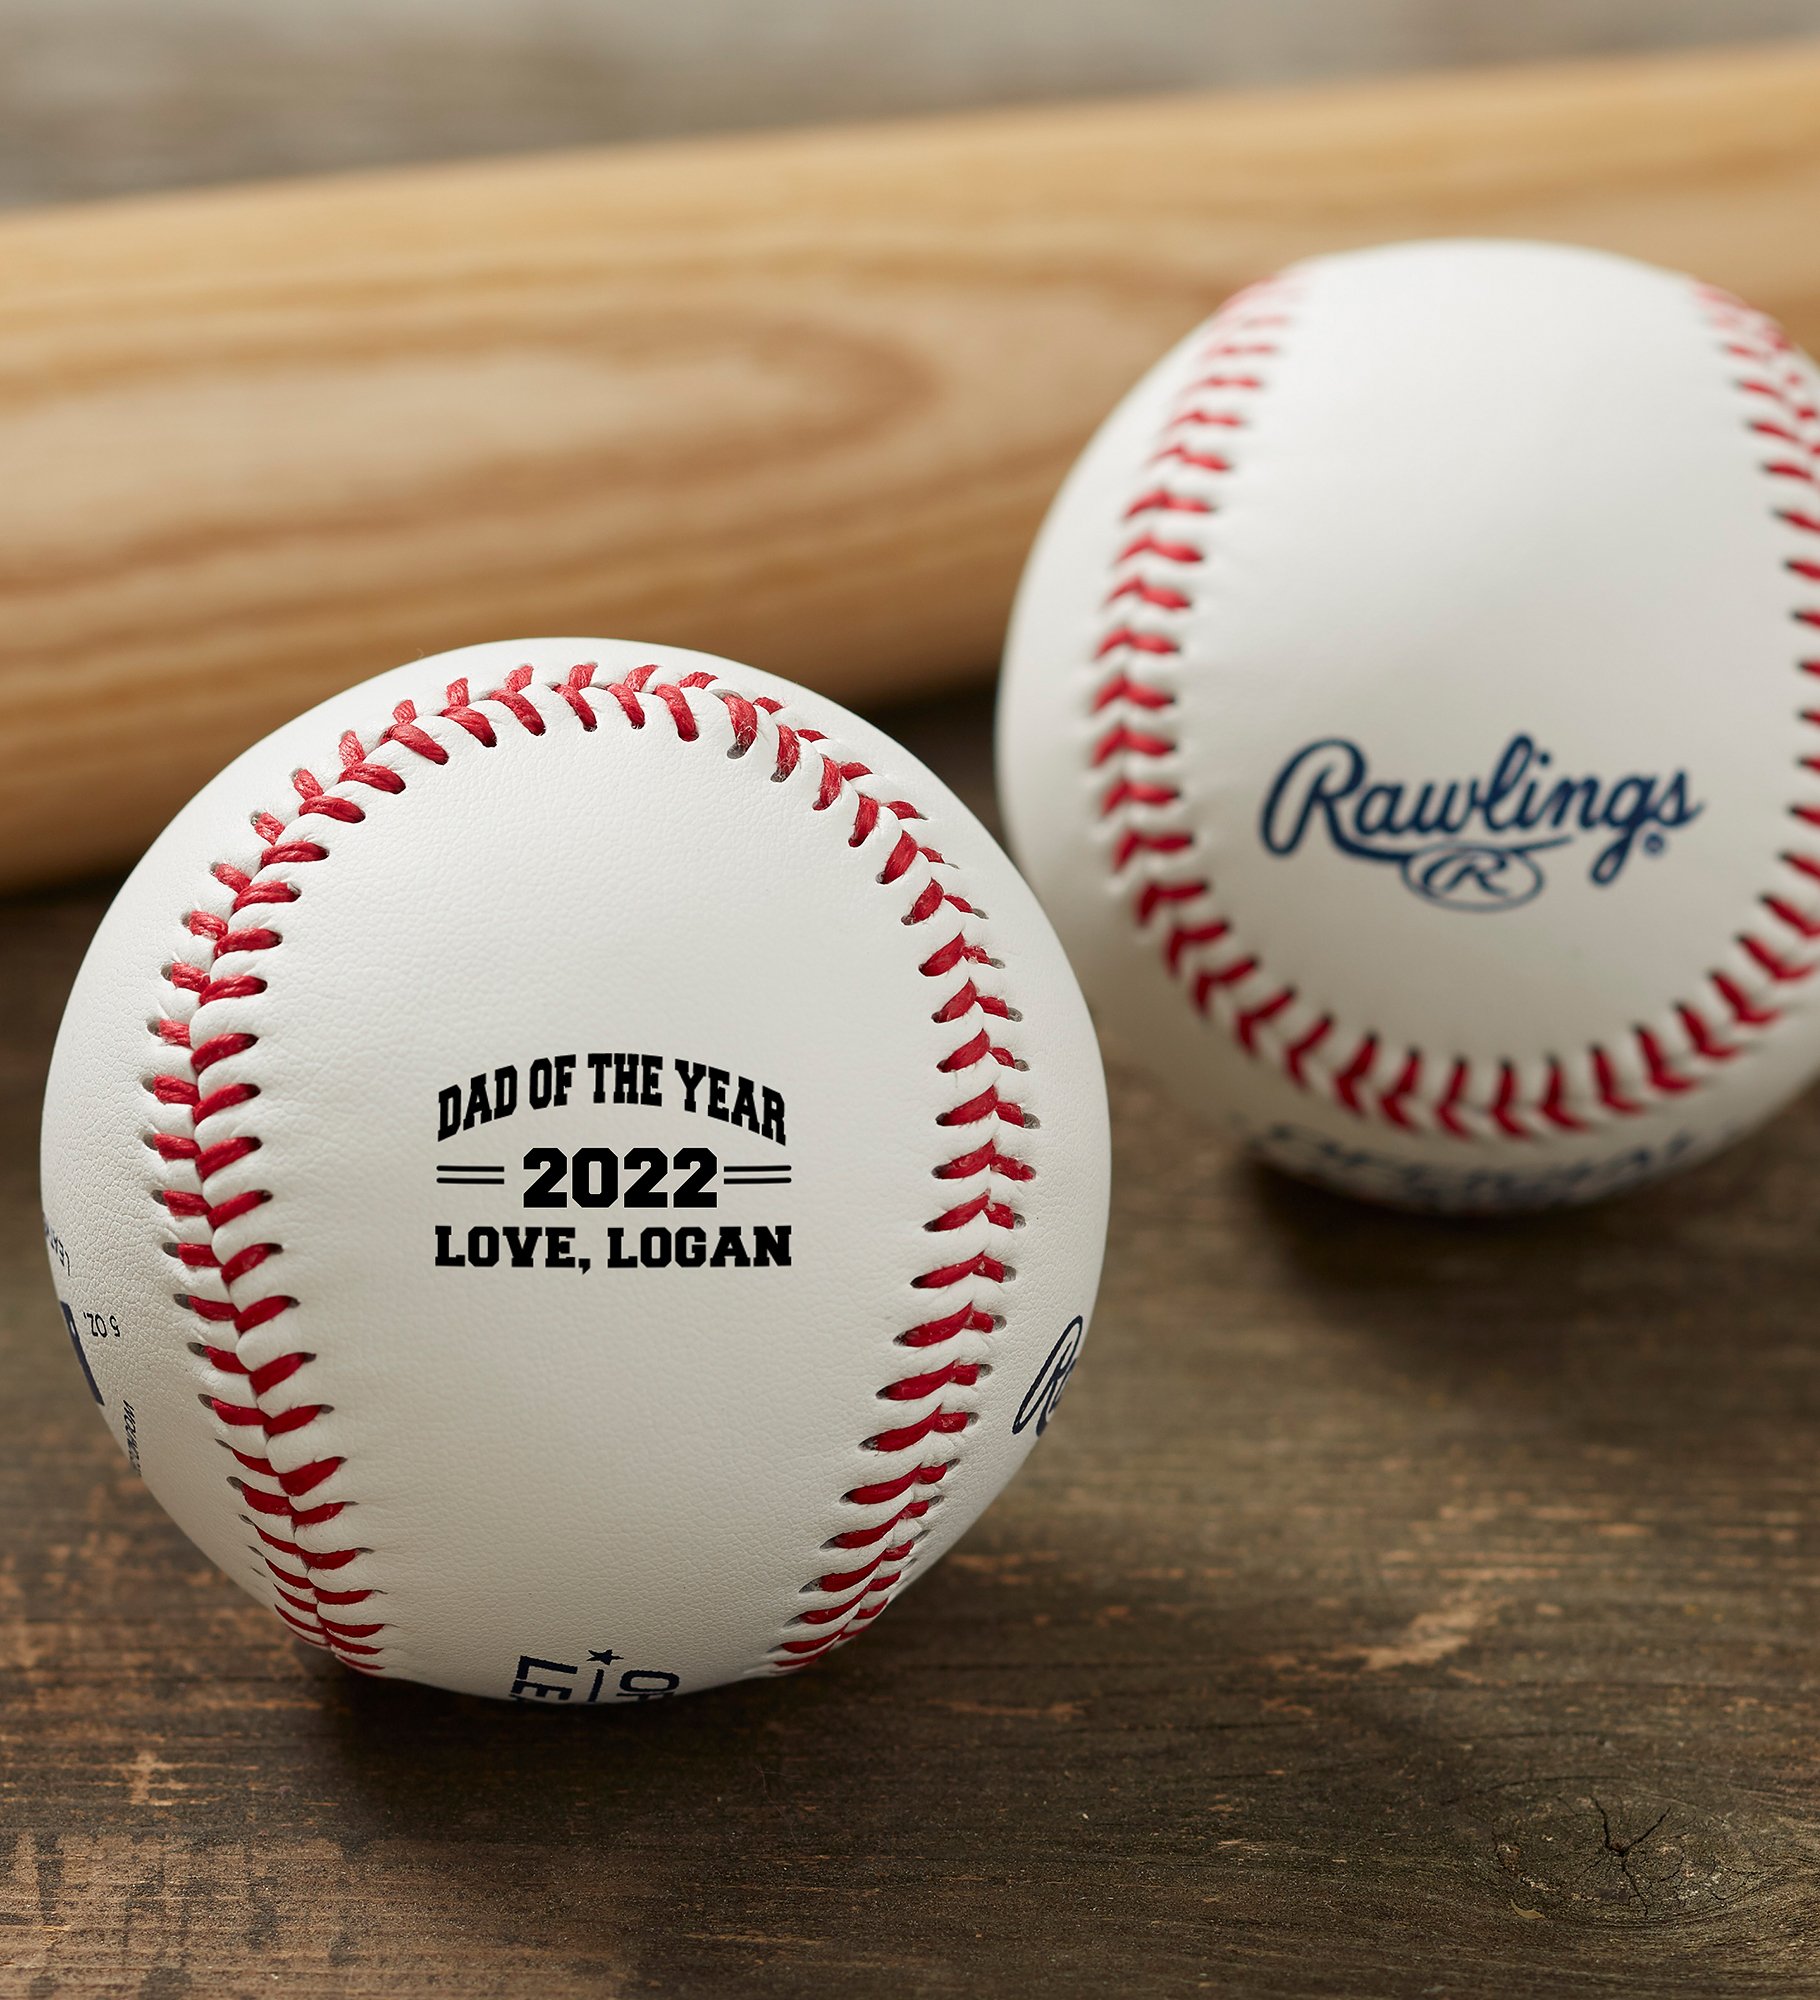 Dad of the Year Personalized Rawlings Baseball